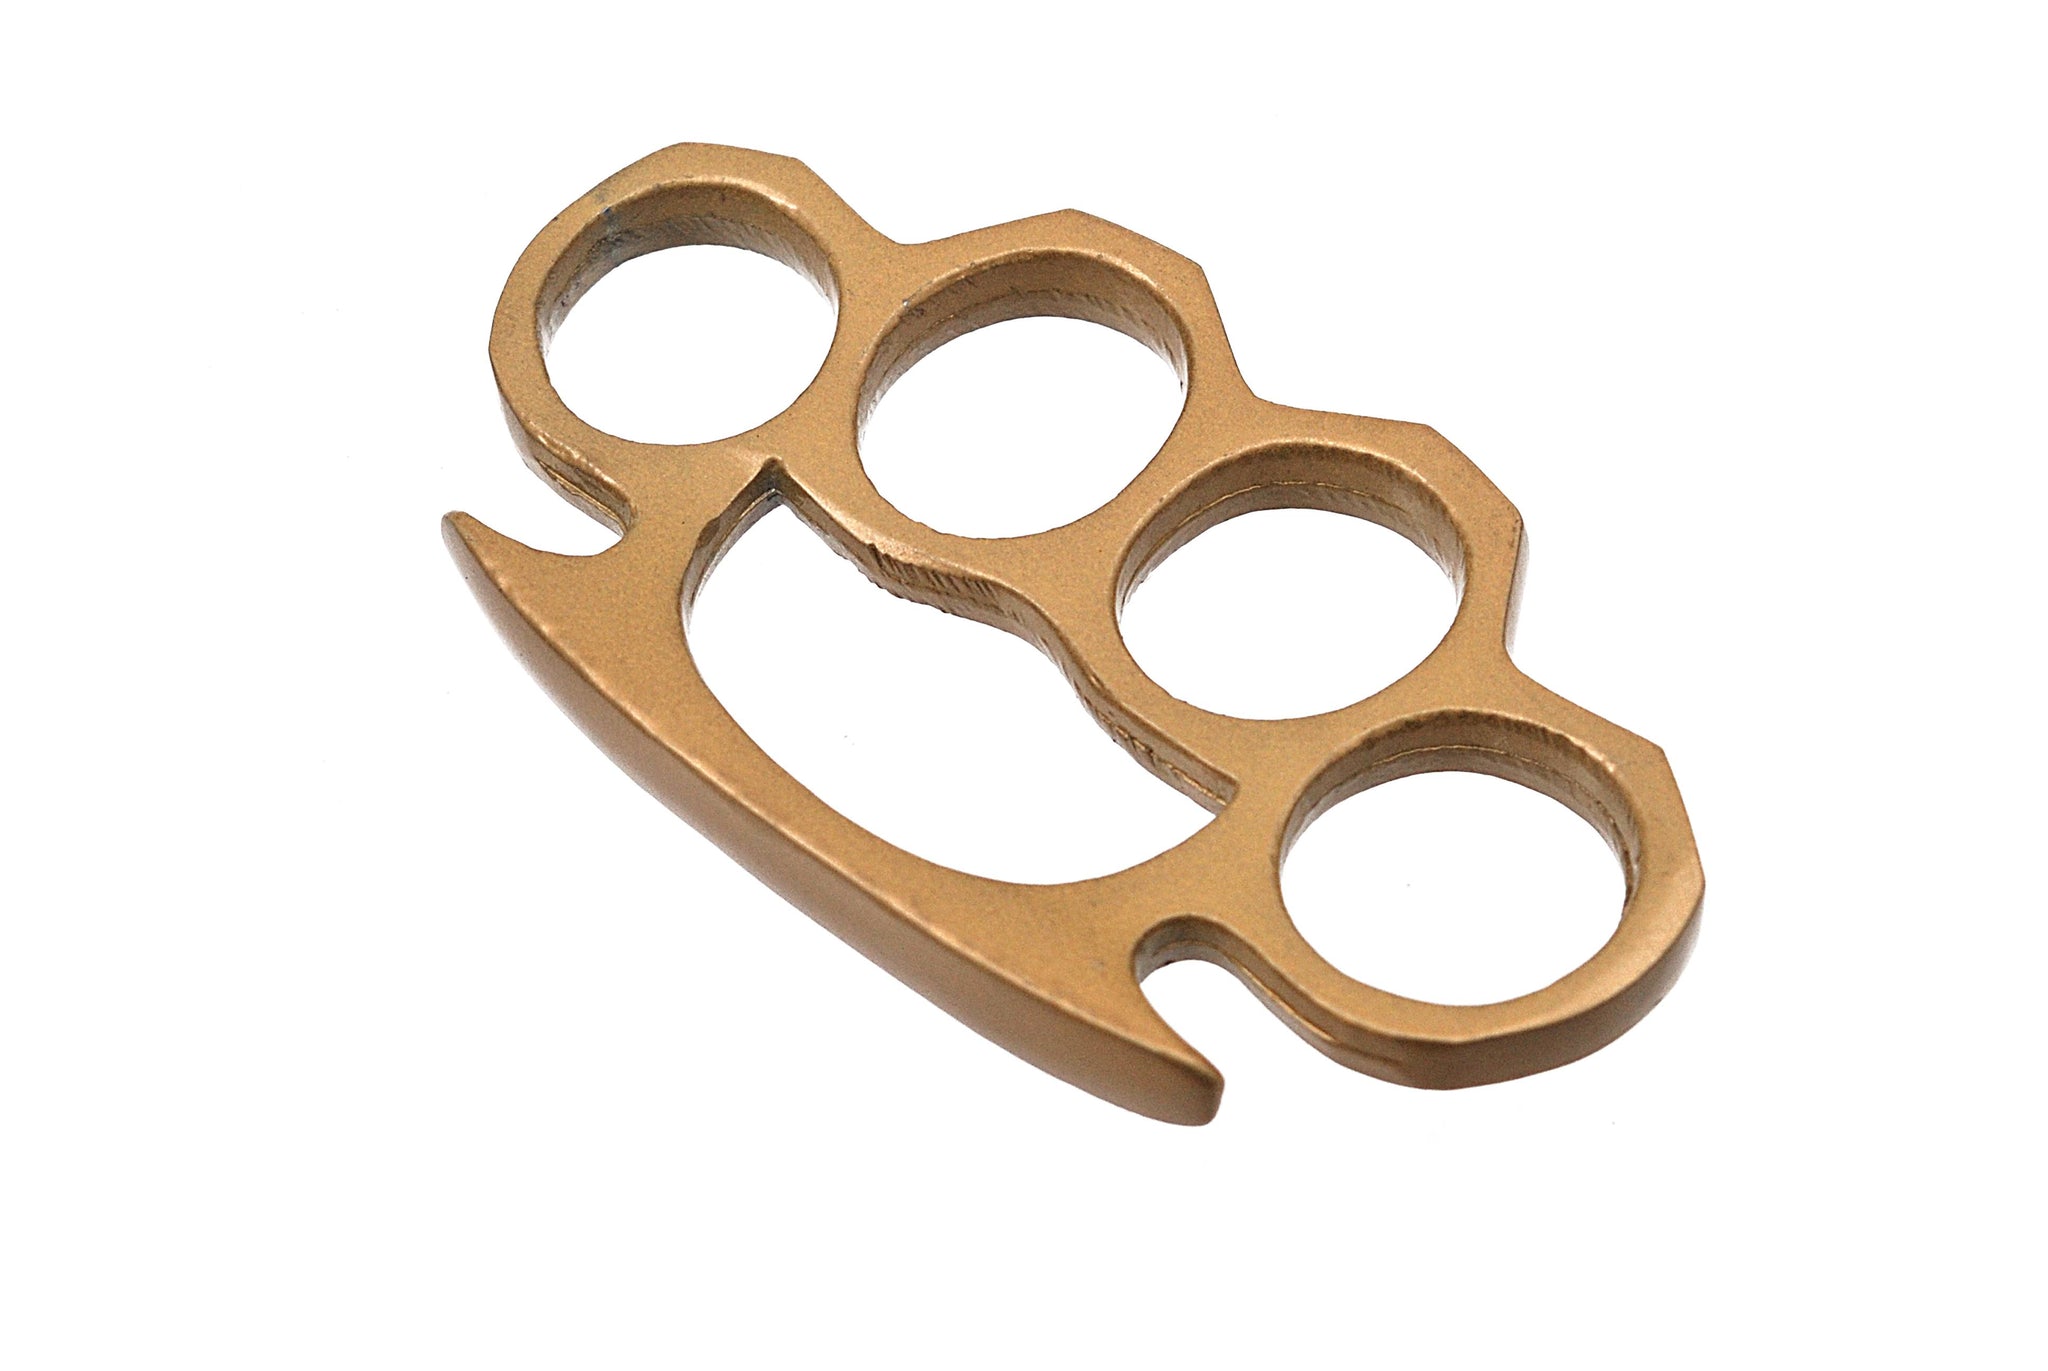 Gear - Weapons and Accessories - Brass Knuckles and Paperweights - Military  Depot